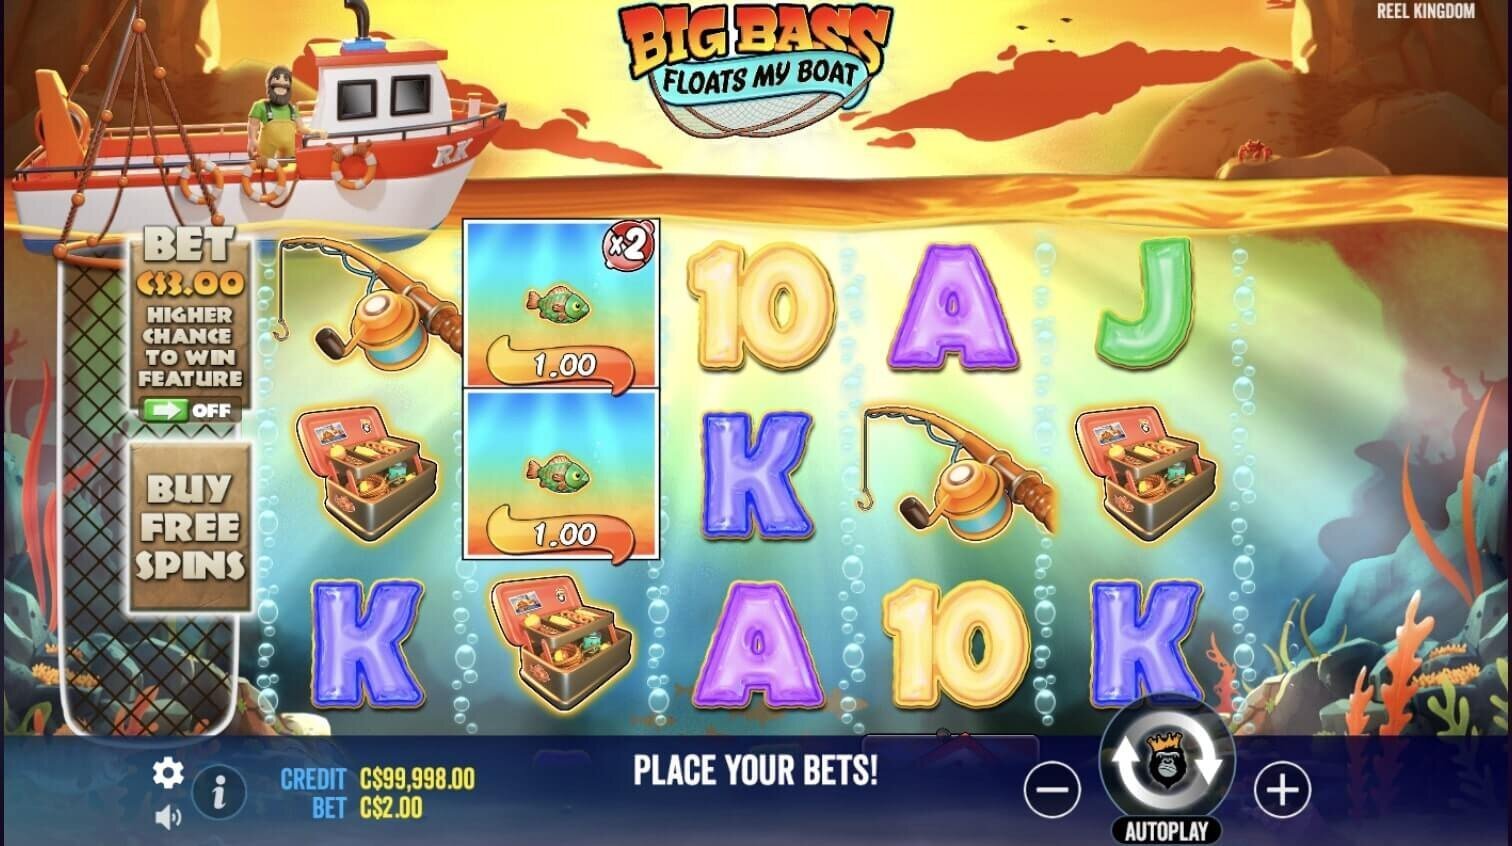 This is how Big Bass Floats My Boat slot looks like